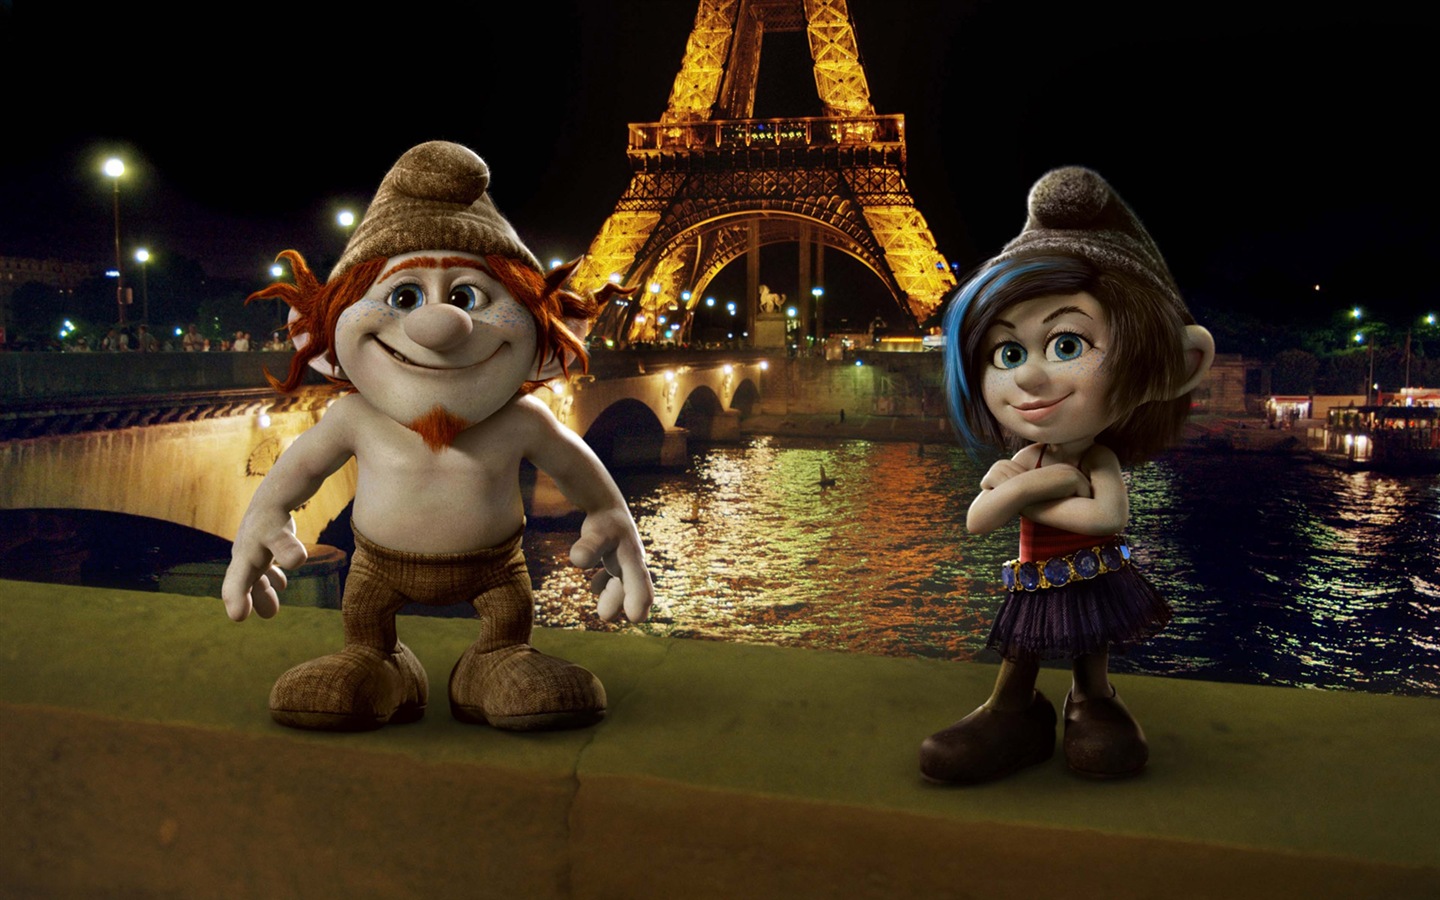 The Smurfs 2 HD movie wallpapers #6 - 1440x900